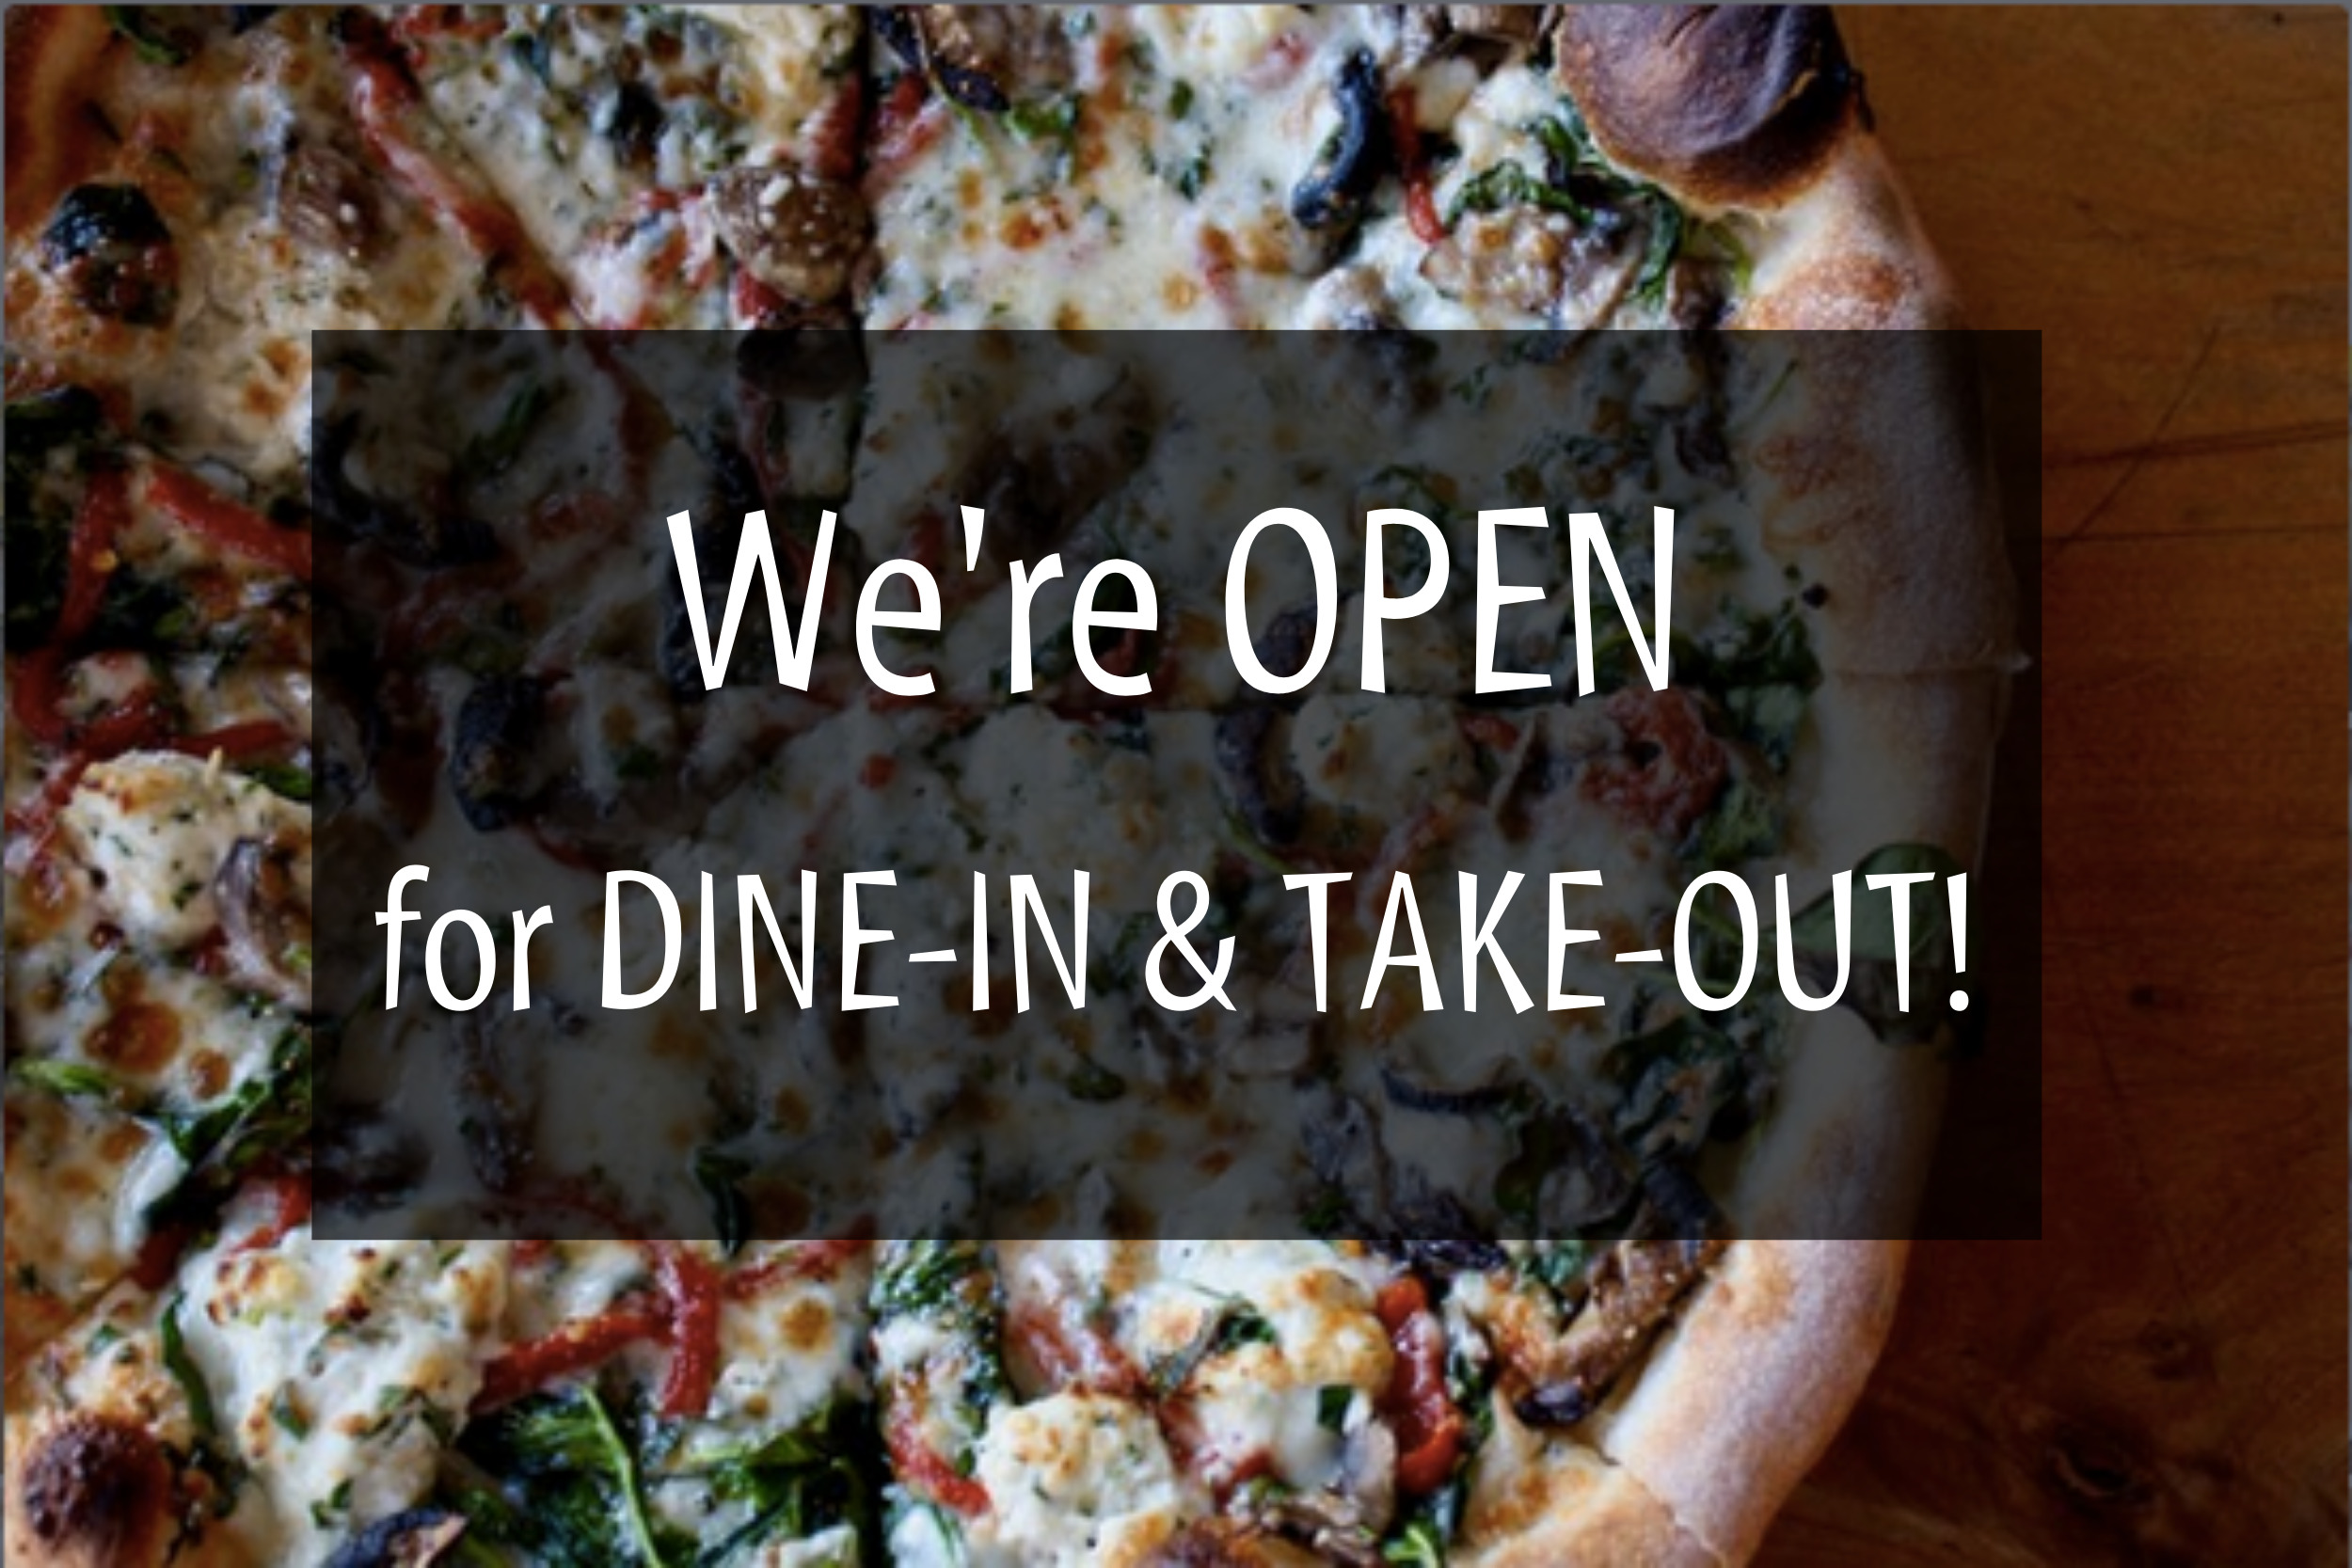 We're open for take-out!